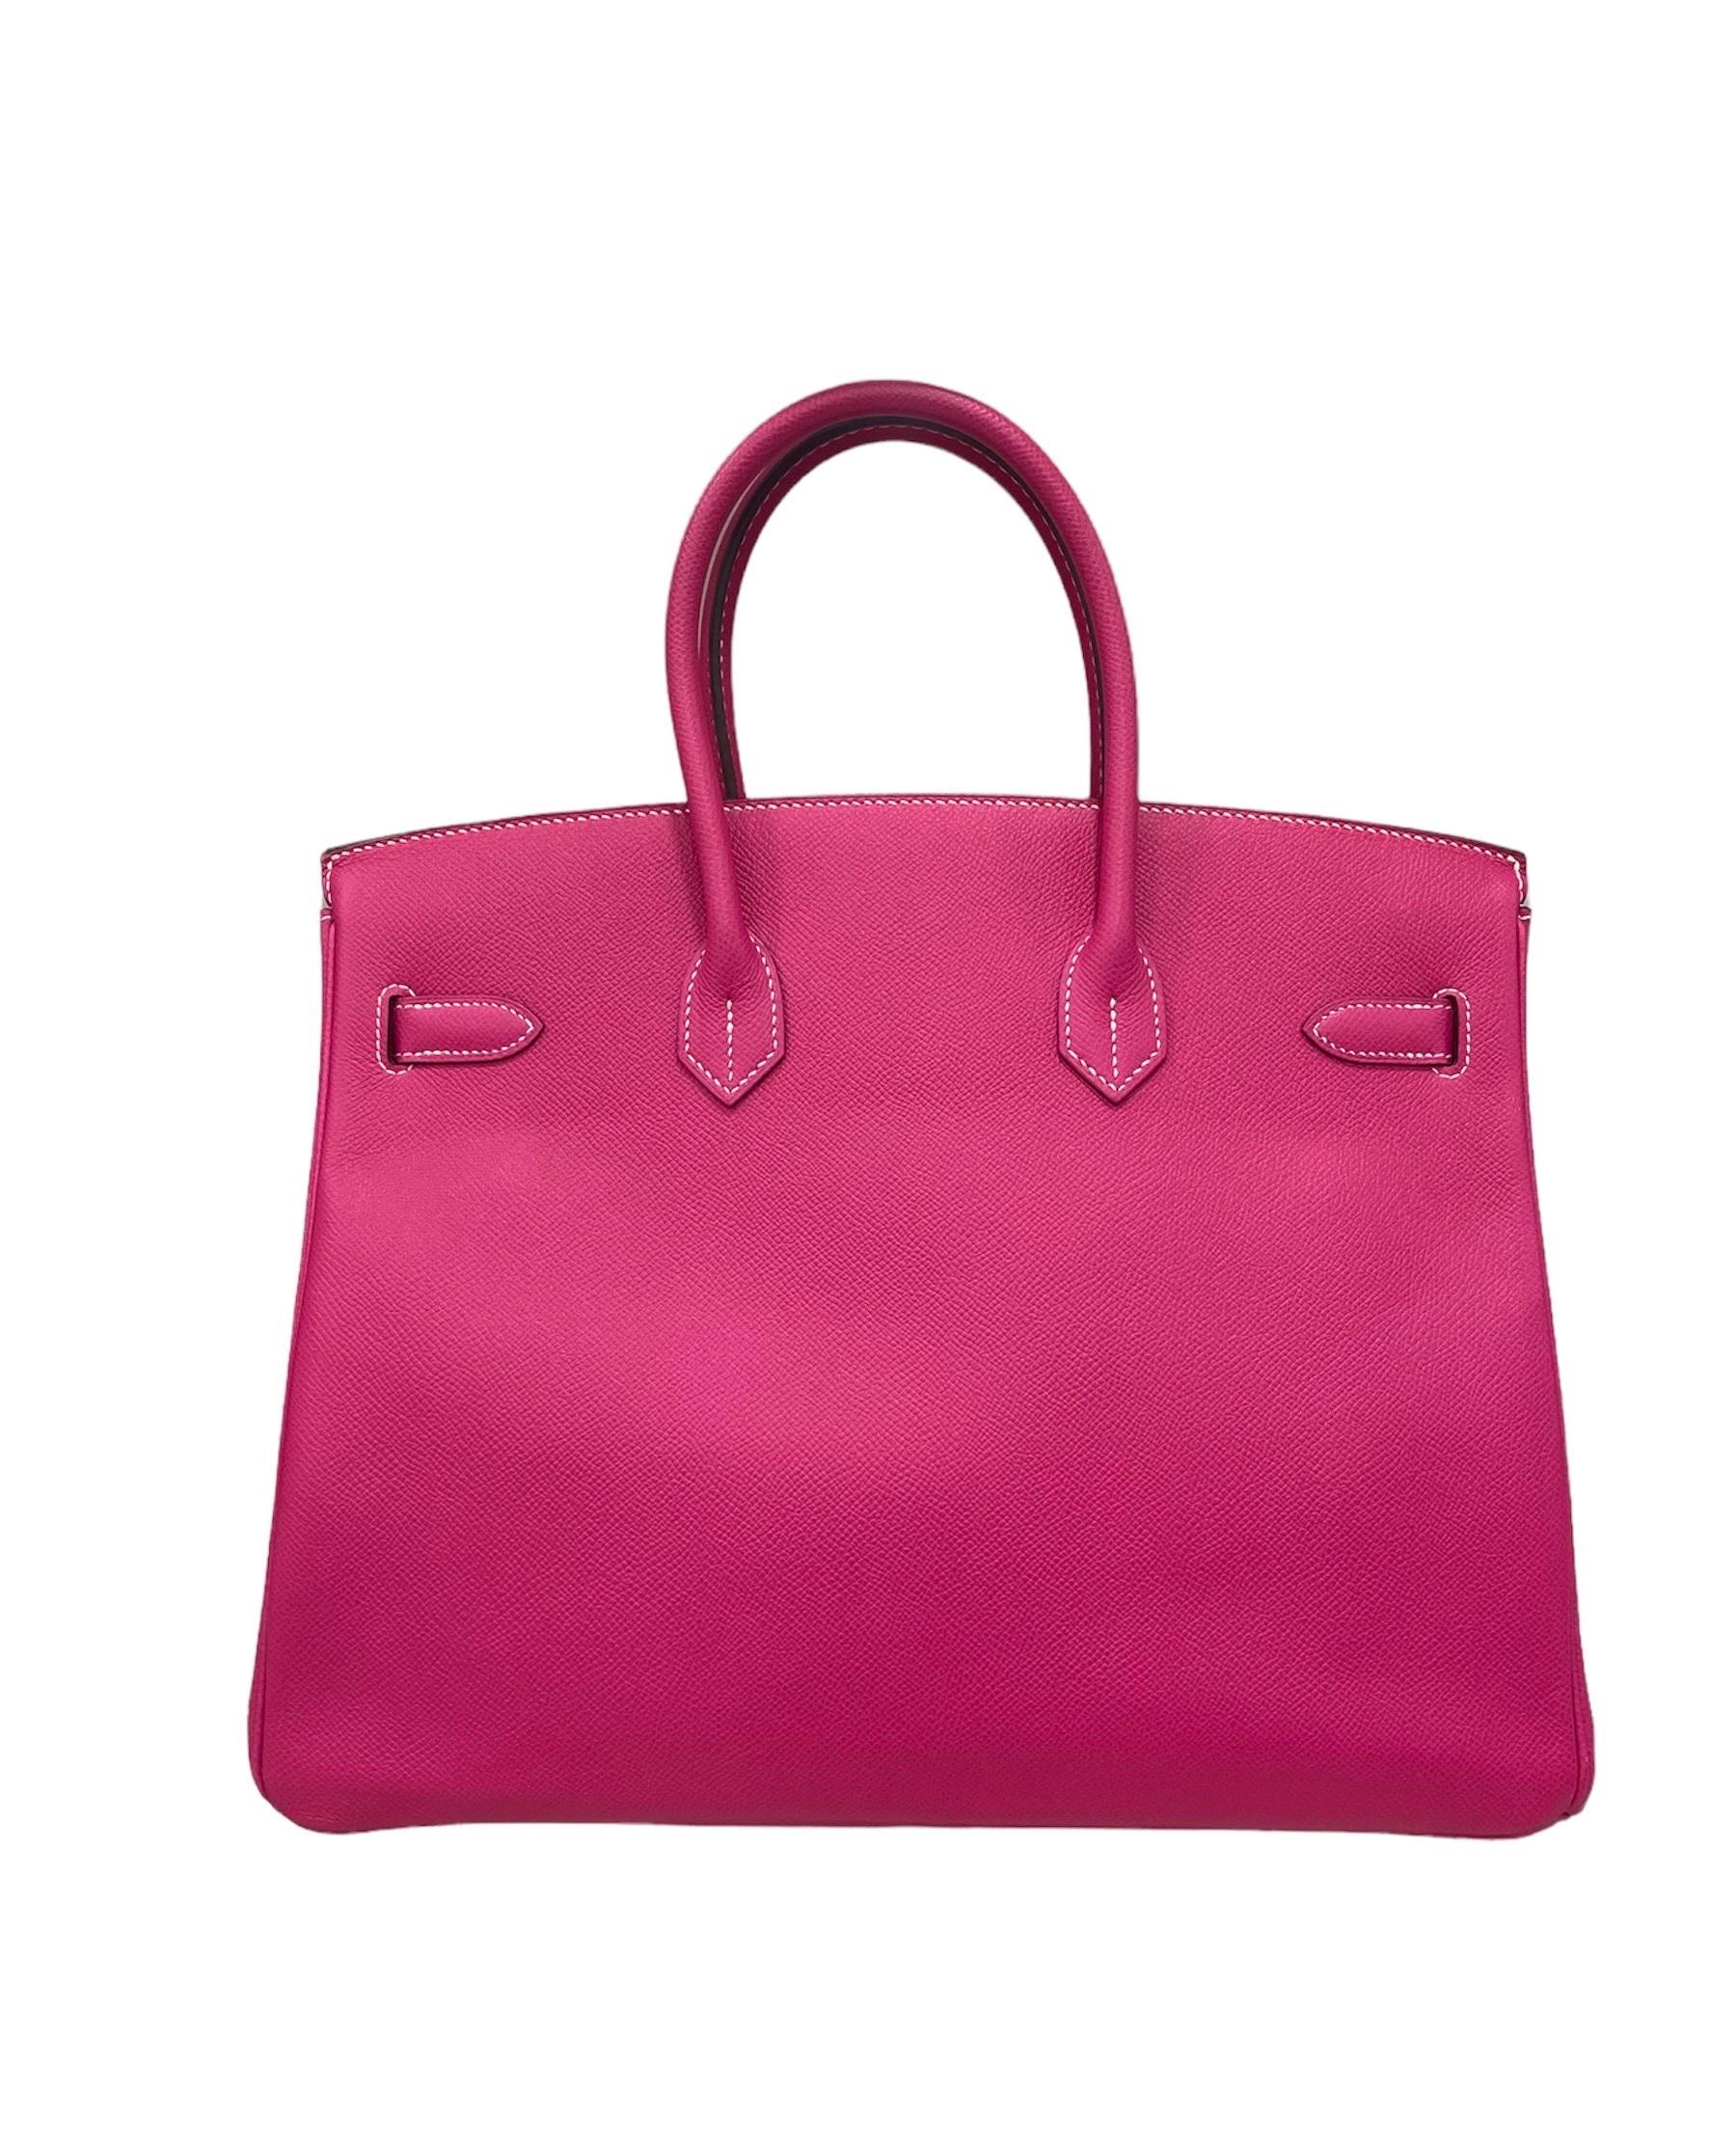 2013 Hermès Birkin 35 Epsom Leather Rose Tyrien Top Handle Bag In Excellent Condition In Torre Del Greco, IT